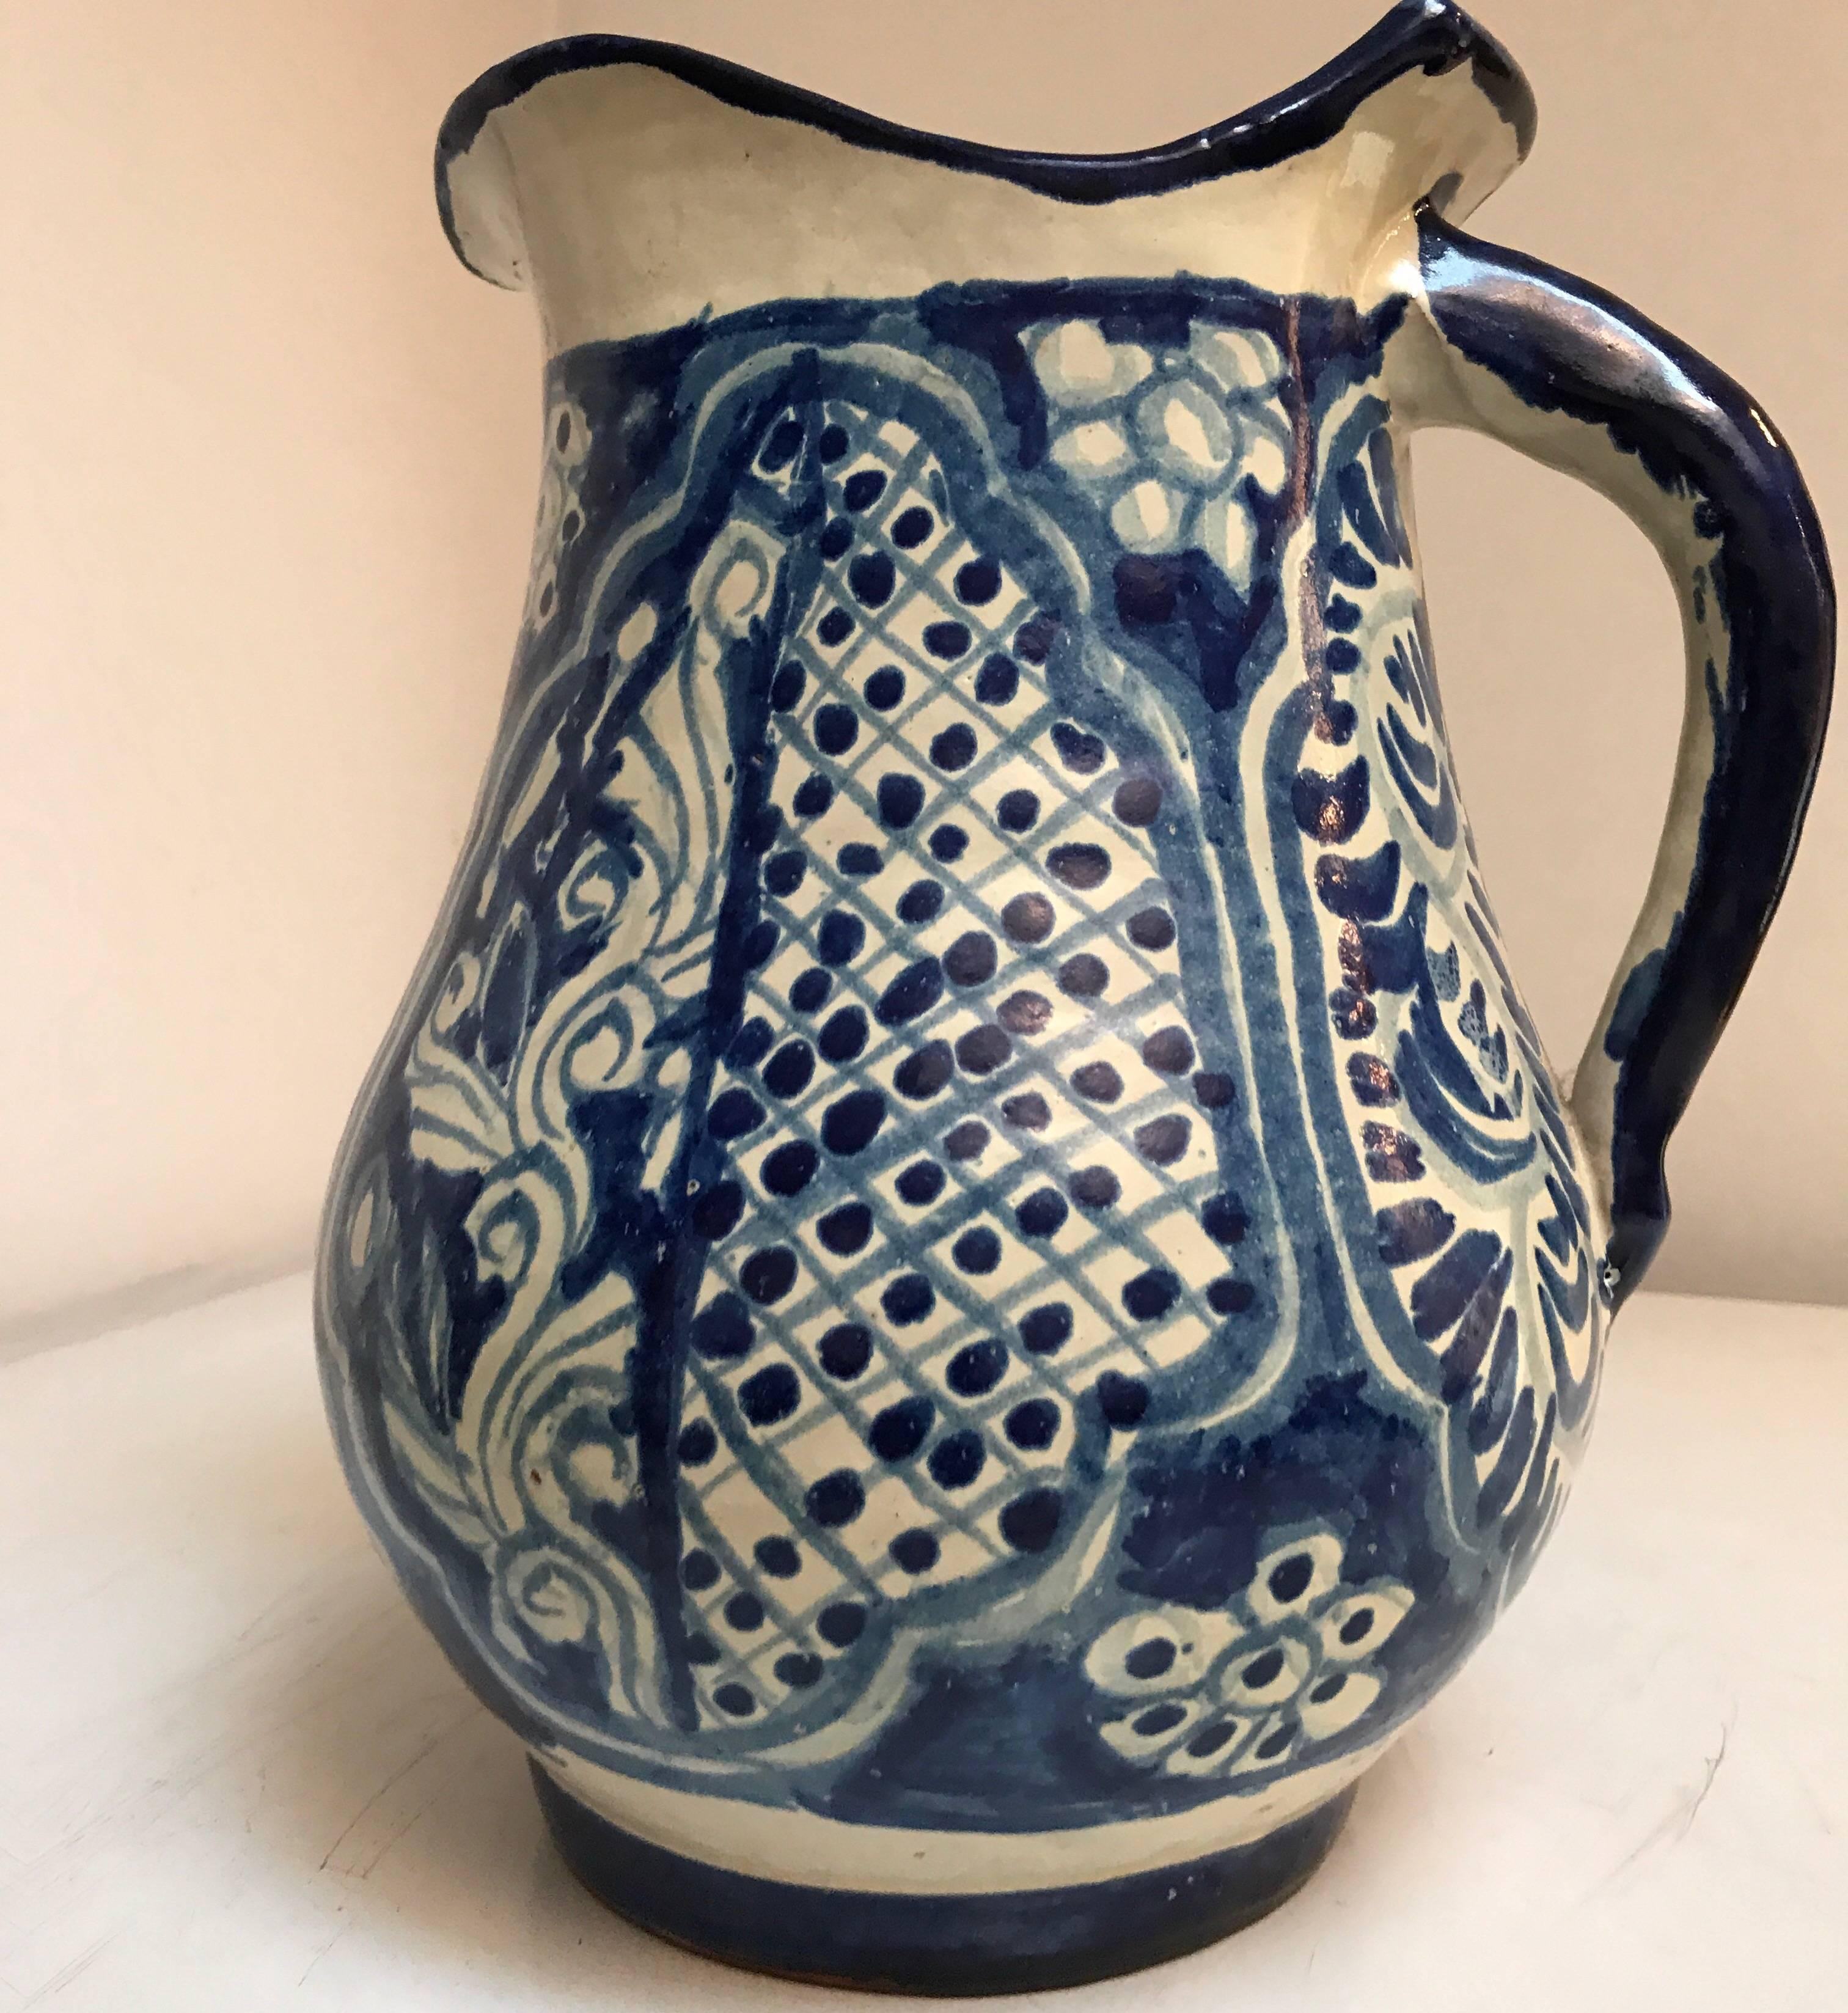 Large scale beautifully decorated Mexican Talavera ceramic blue and white pitcher.
Great for al fresco summertime dining.